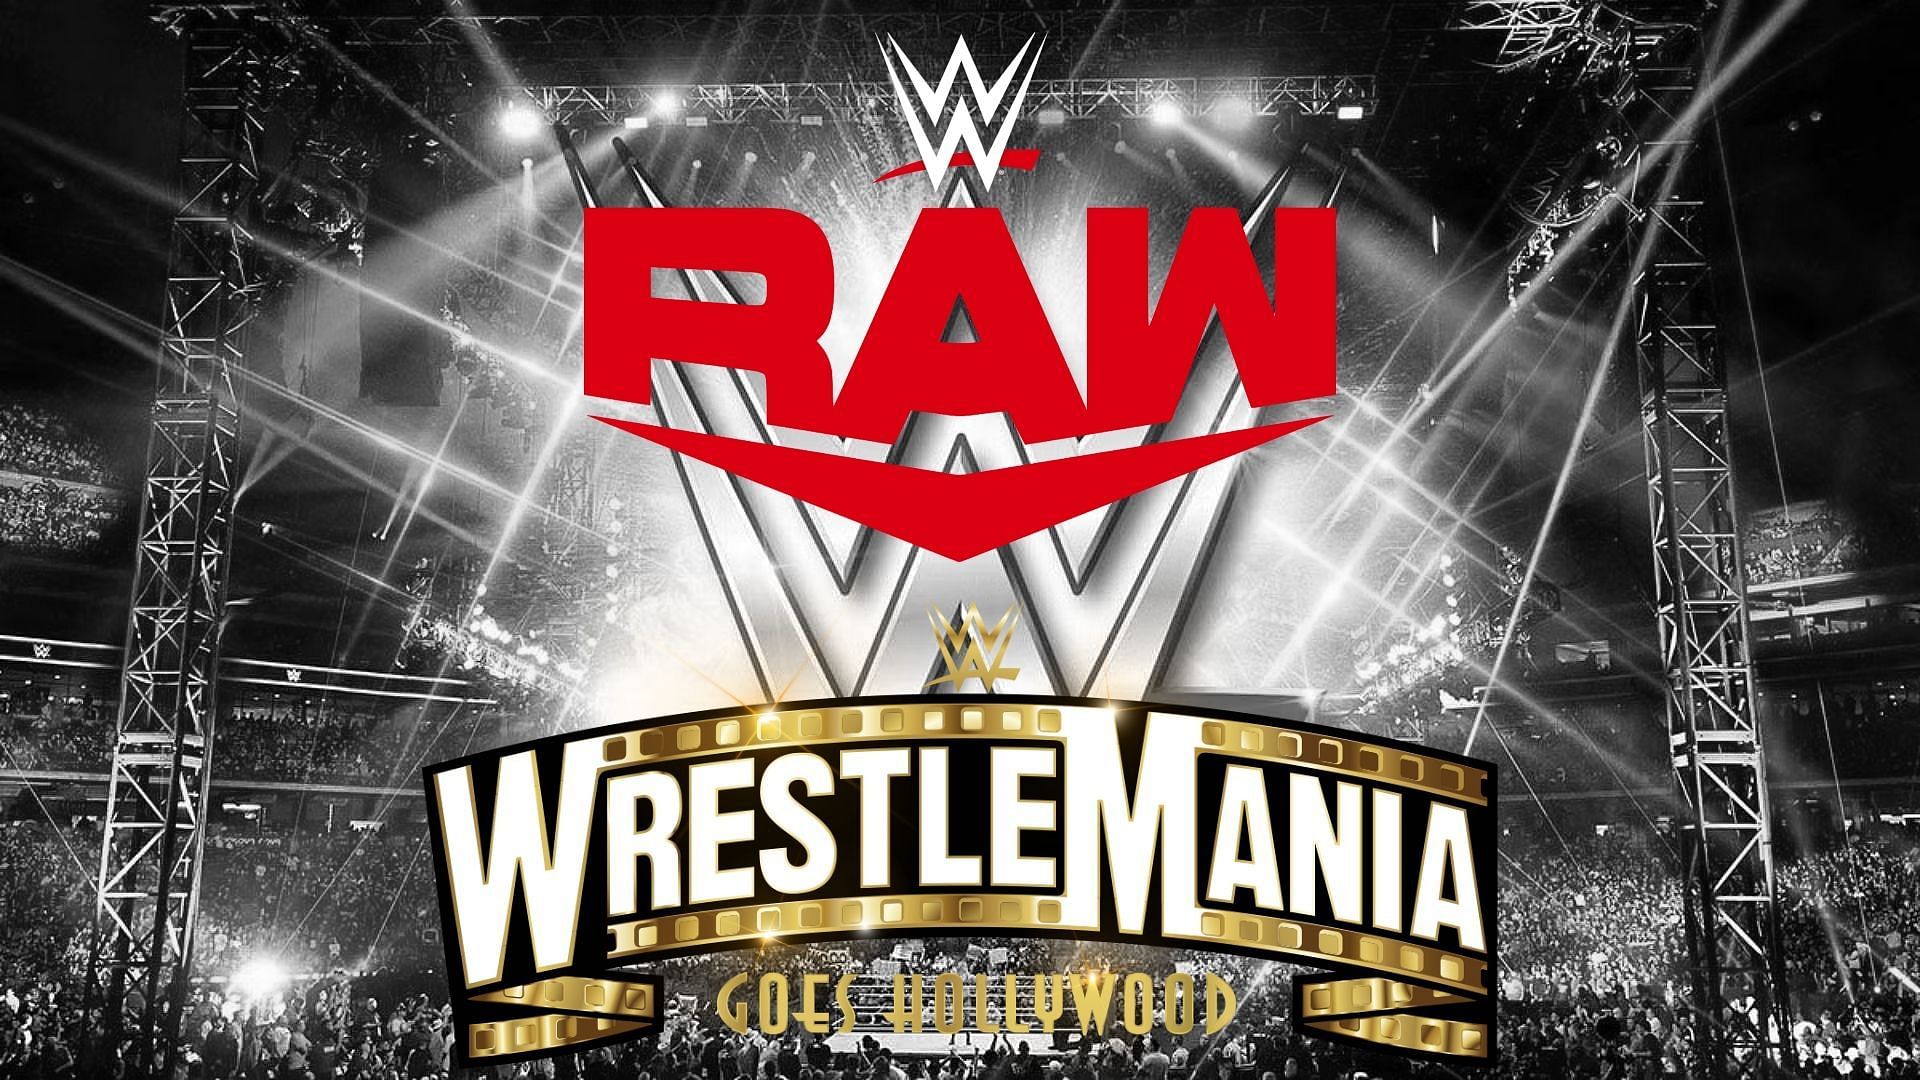 WrestleMania 39 is set to take place in Los Angeles on April 1st and 2nd